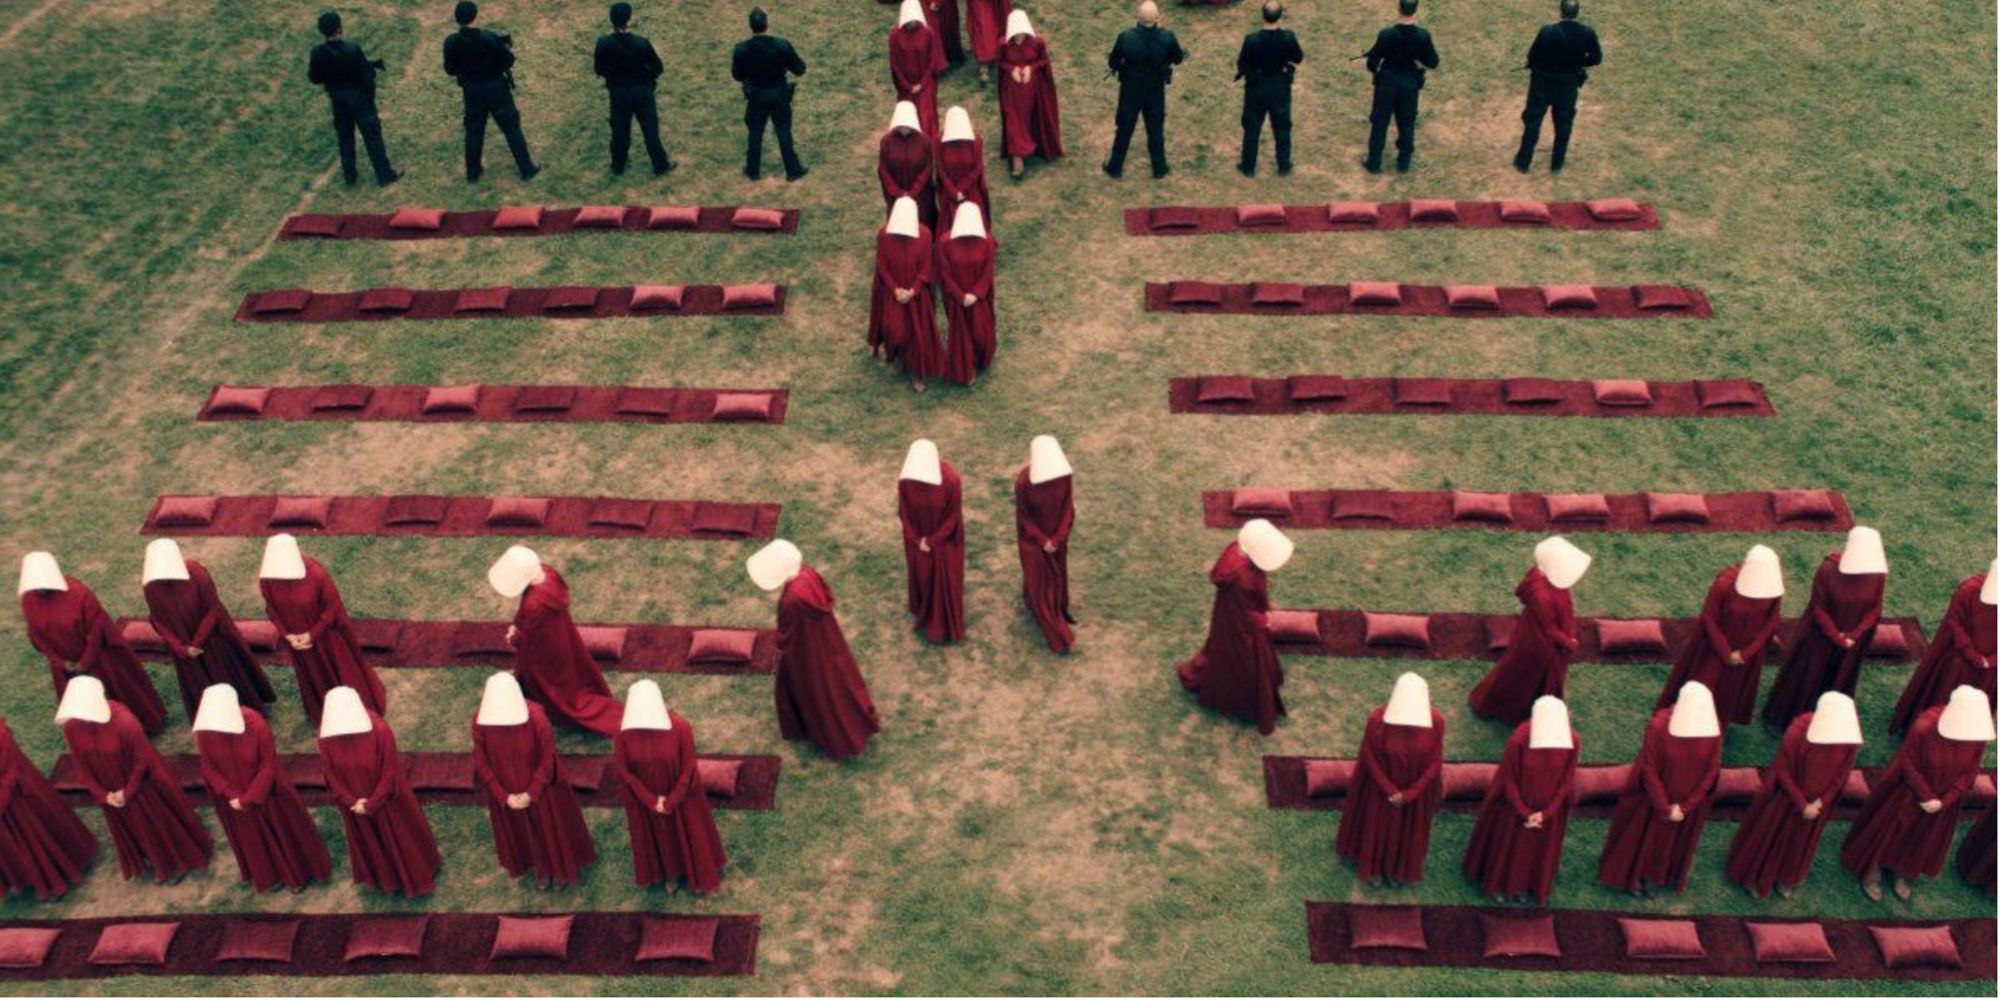 Handmaids lining up in pews